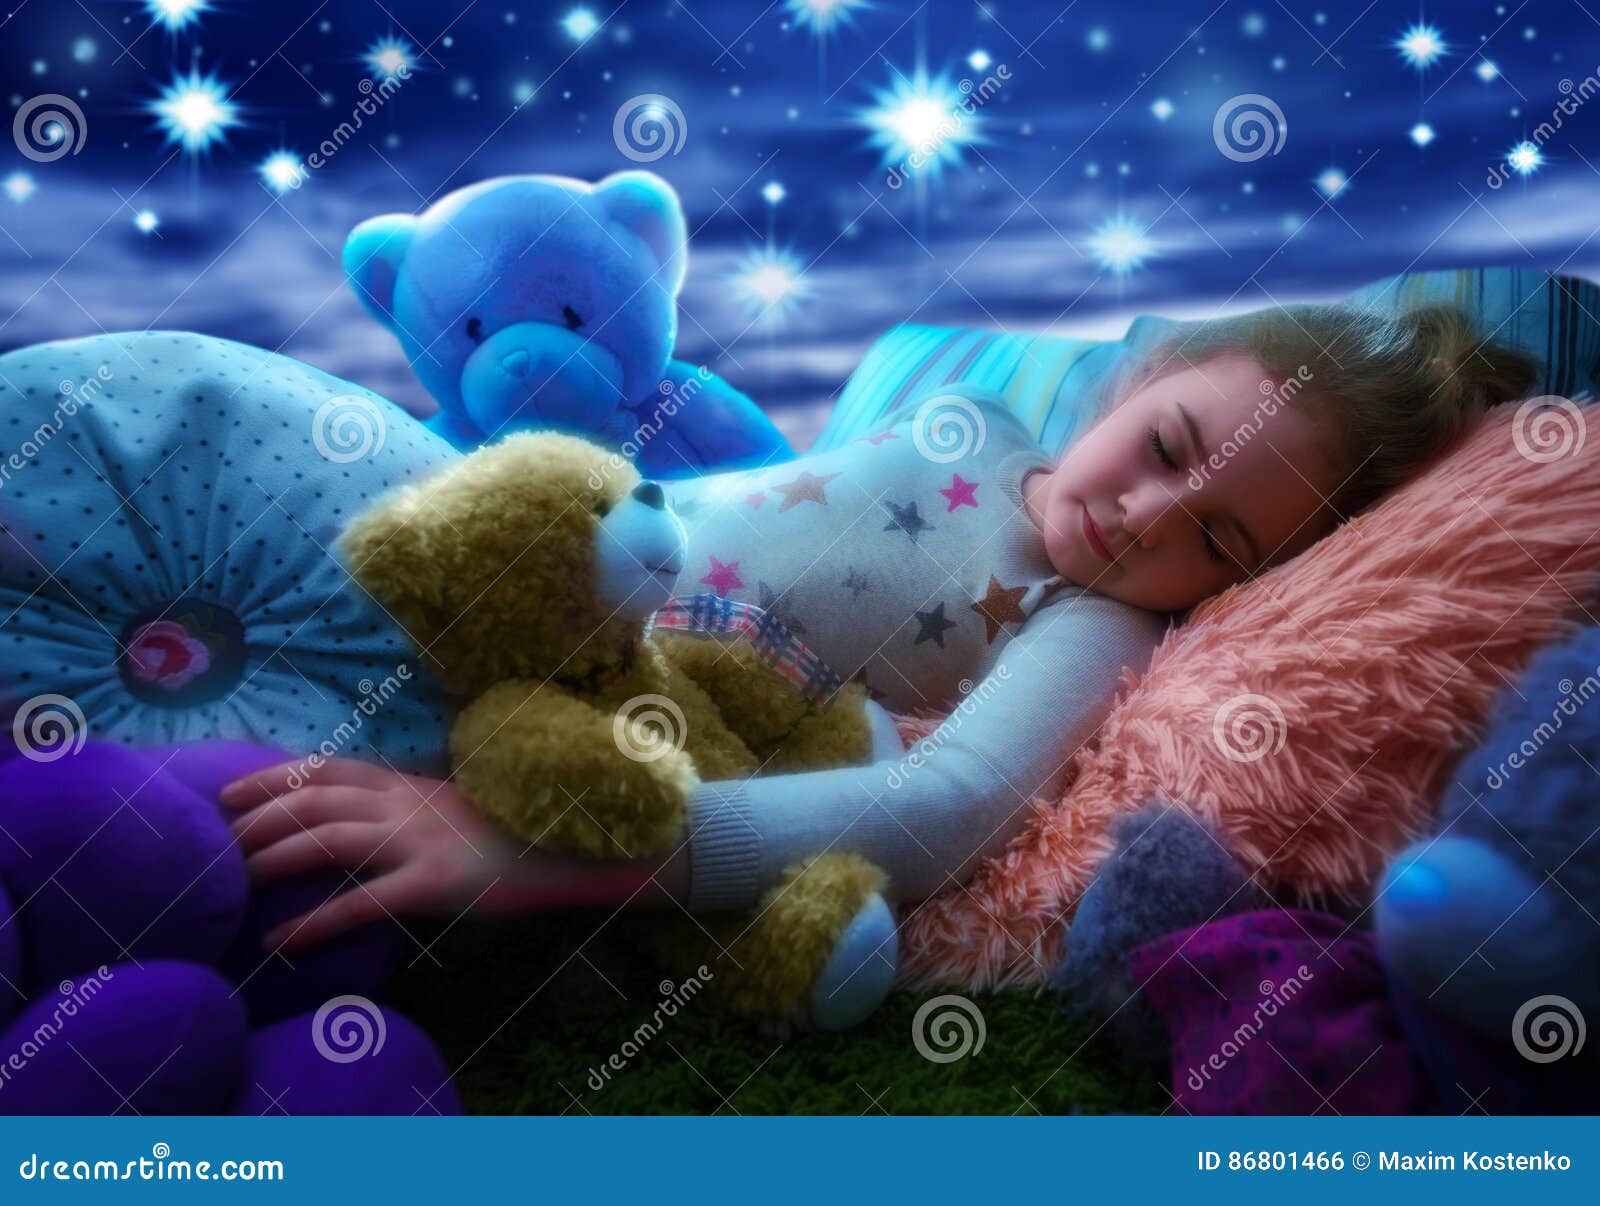 little girl sleeping with teddy bear in bed, dreaming the starry sky at bedtime night